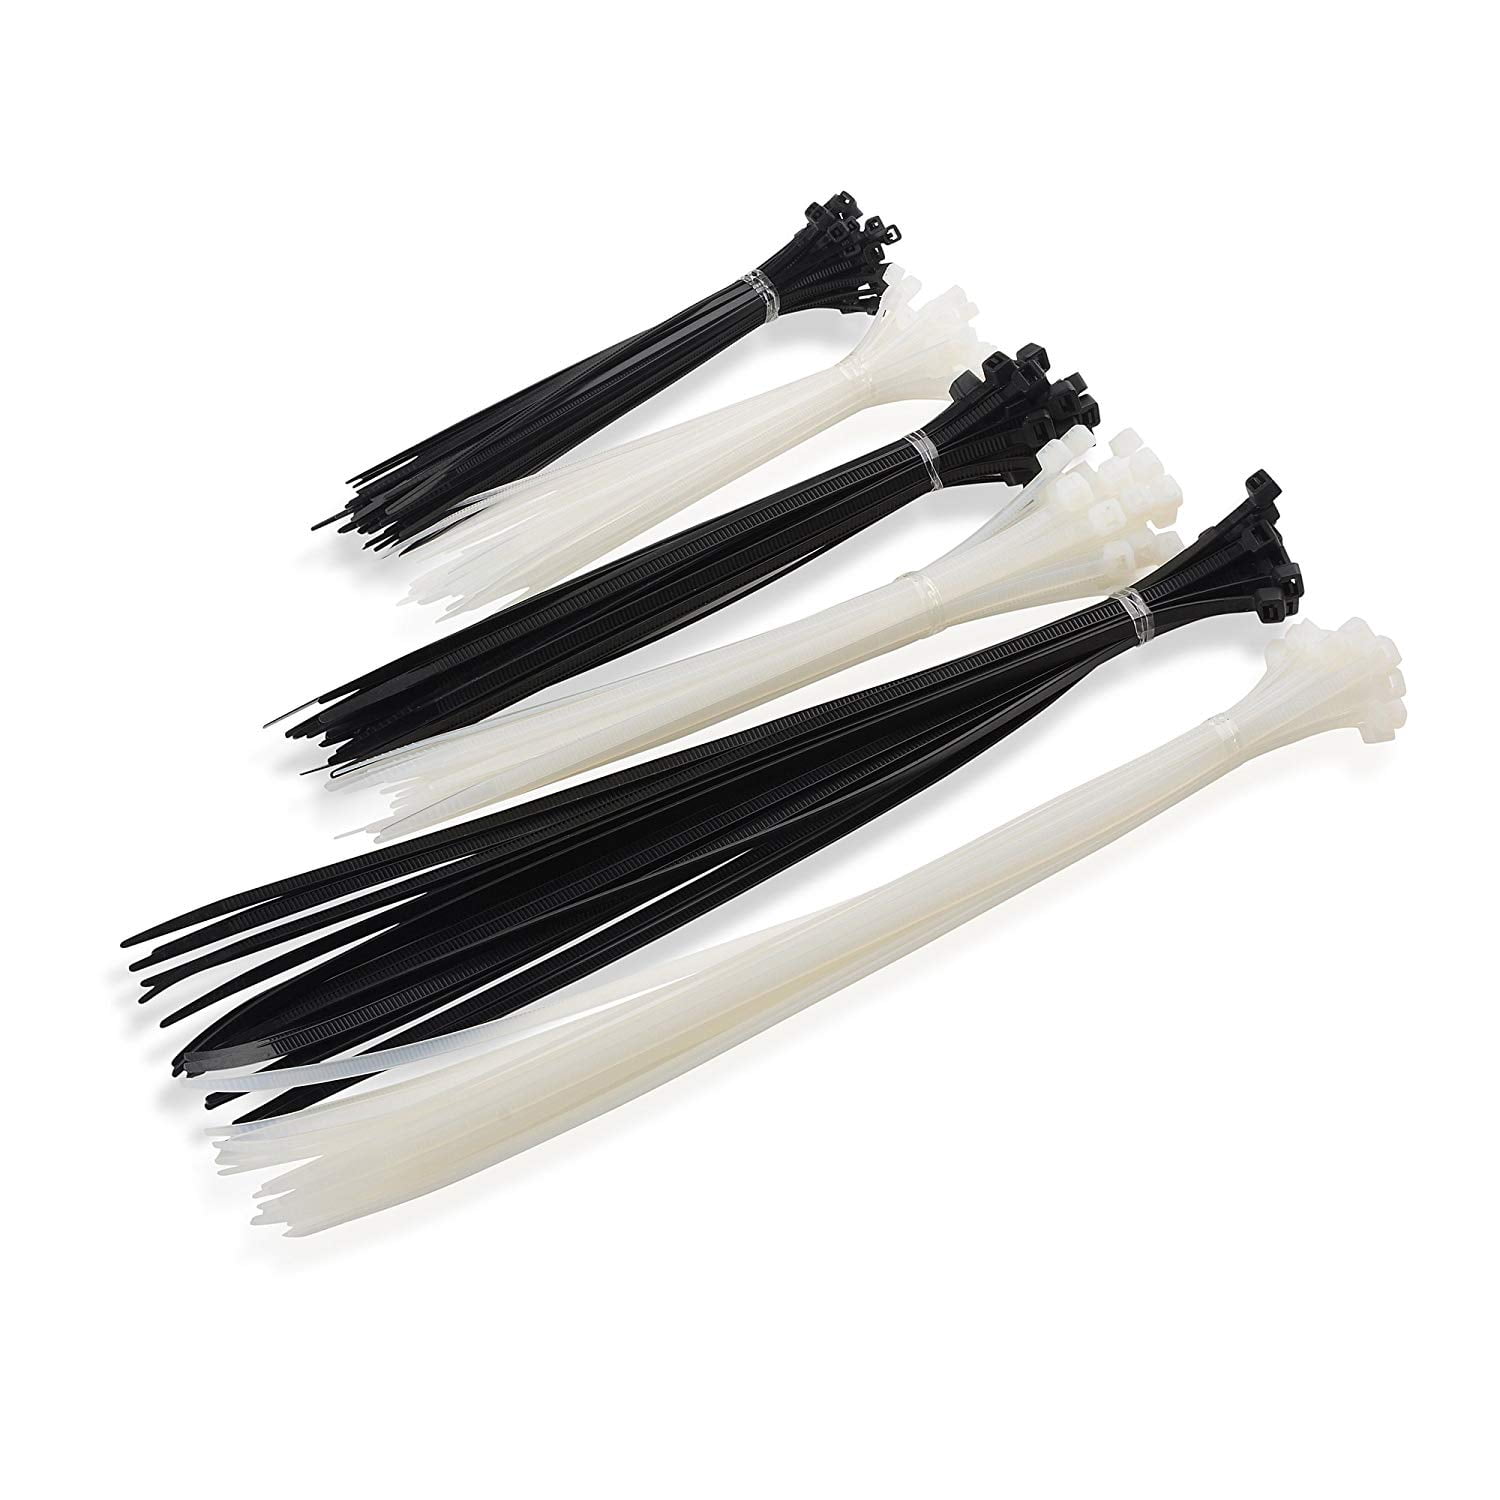 2 SIZES BLACK 6 PACKS CABLE TIES 